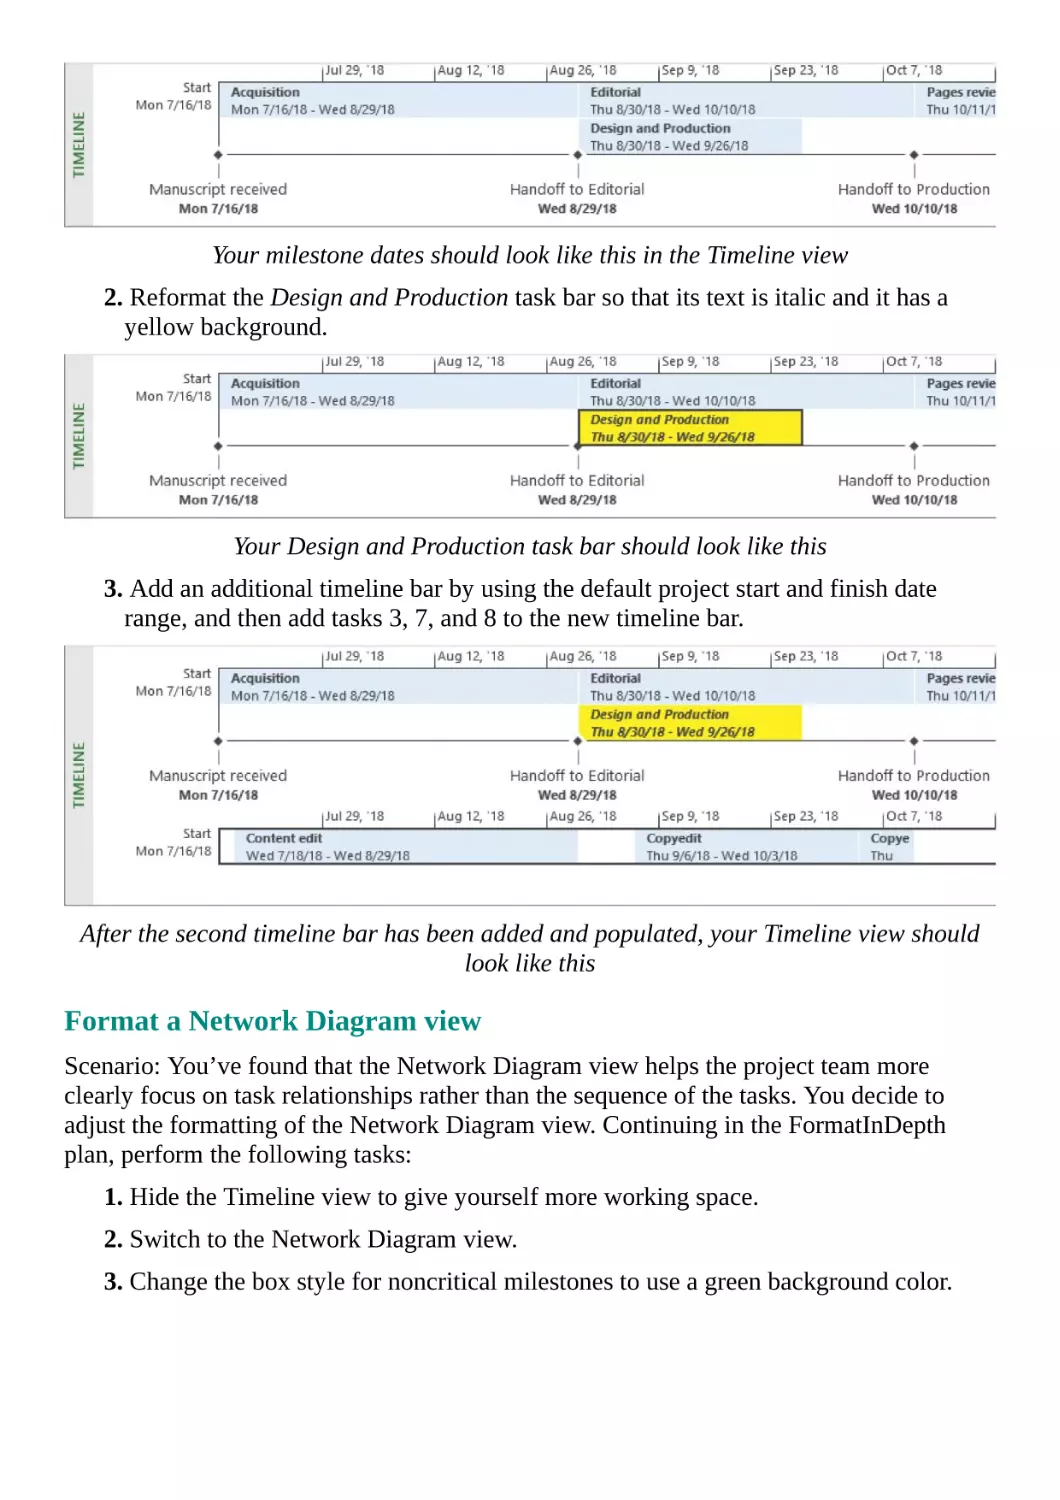 Format a Network Diagram view